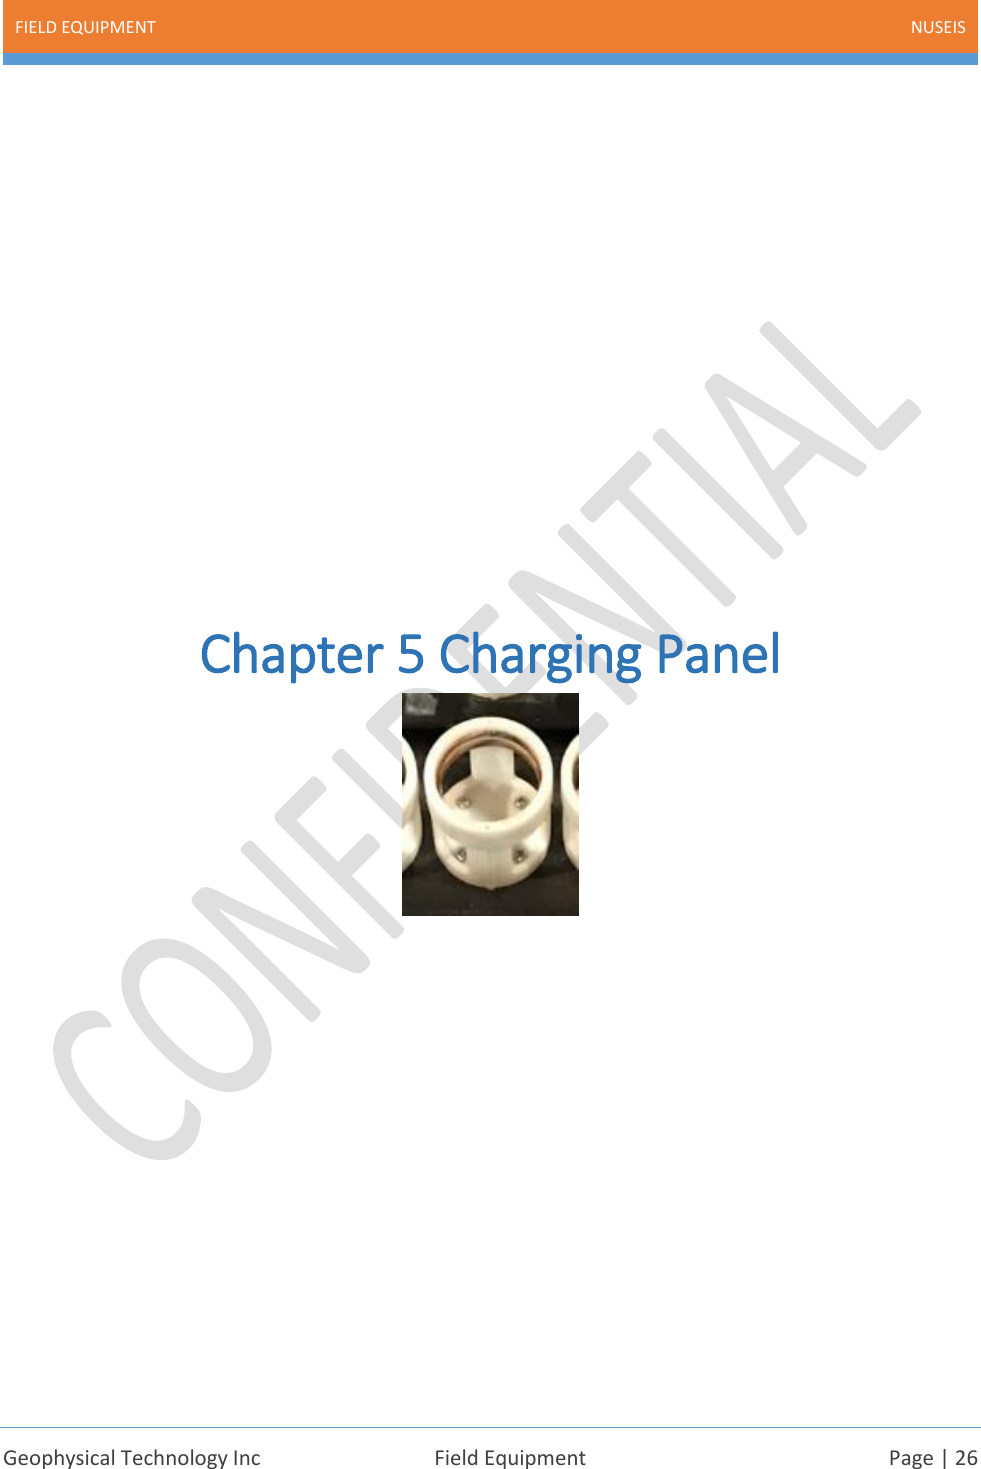 FIELD EQUIPMENT NUSEIS    Geophysical Technology Inc  Field Equipment  Page | 26             Chapter 5 Charging Panel            